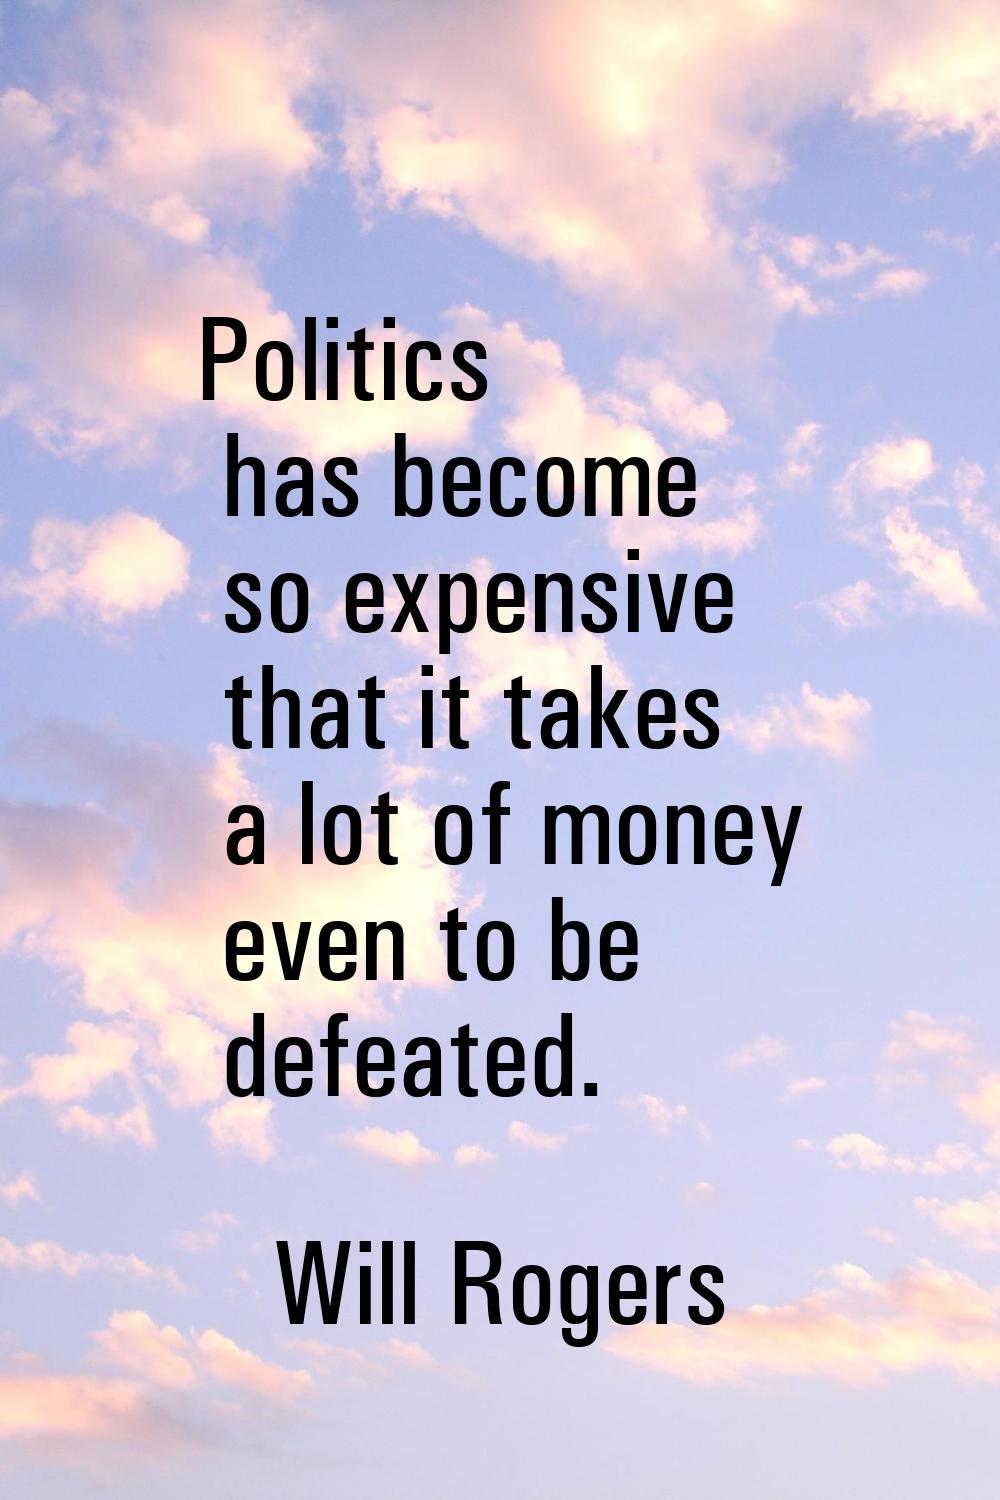 Politics has become so expensive that it takes a lot of money even to be defeated.